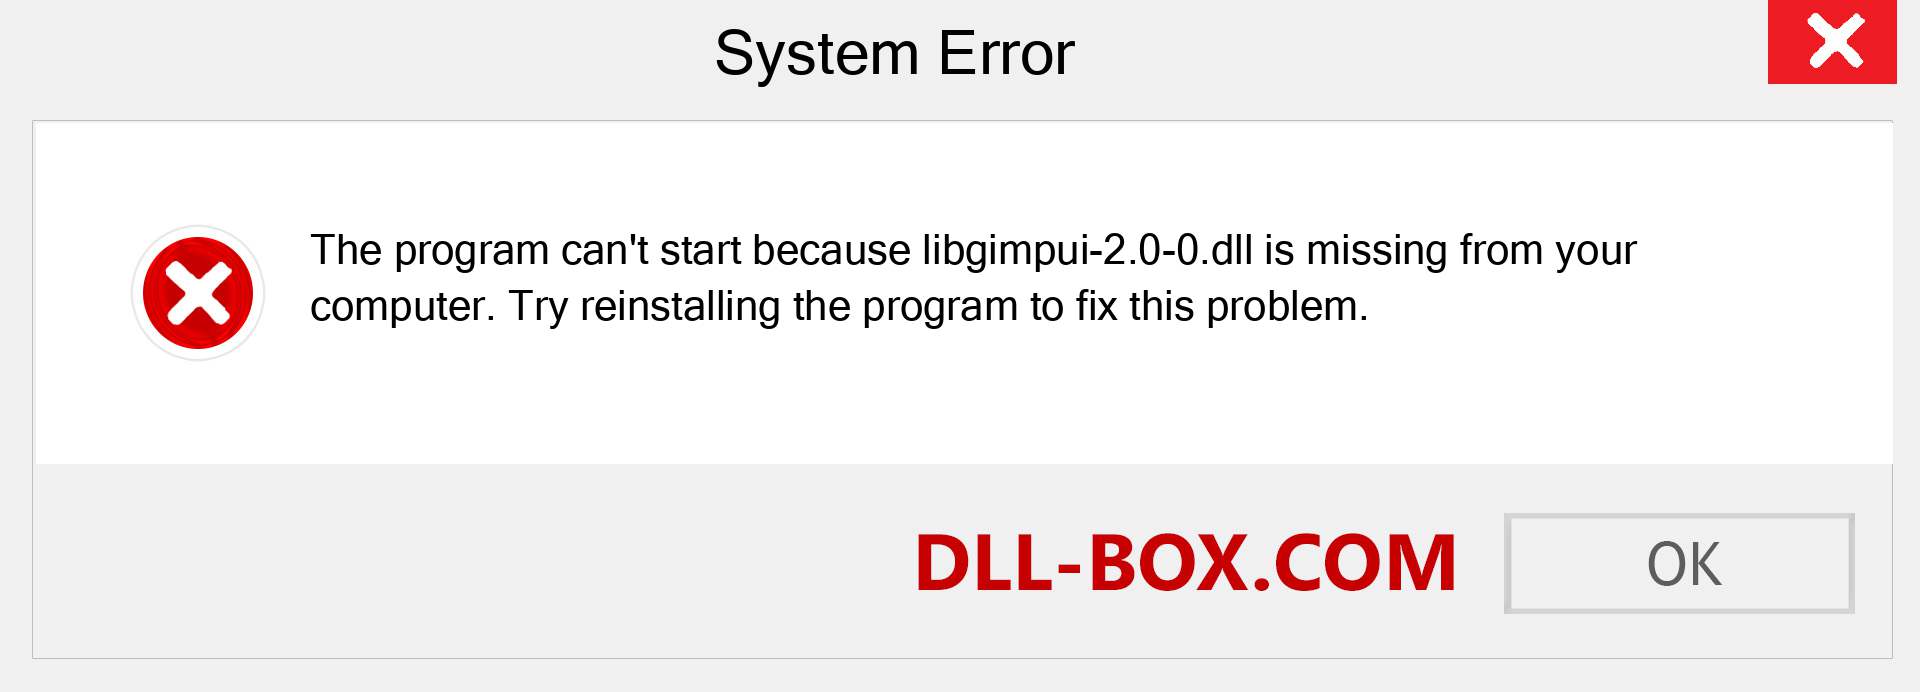  libgimpui-2.0-0.dll file is missing?. Download for Windows 7, 8, 10 - Fix  libgimpui-2.0-0 dll Missing Error on Windows, photos, images